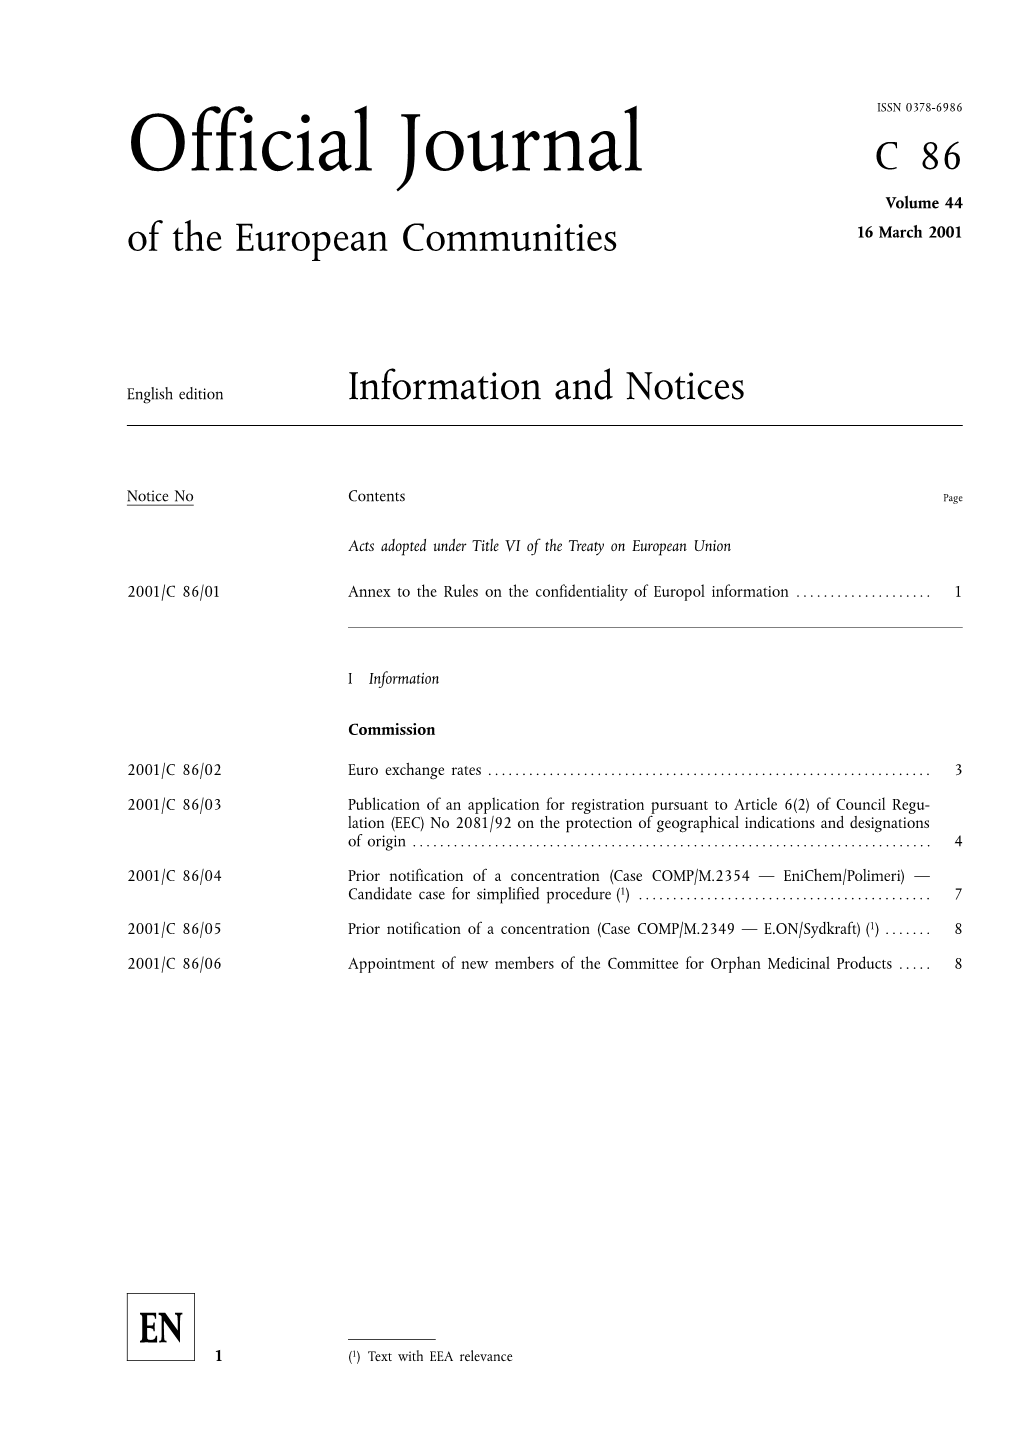 Official Journal C86 Volume 44 of the European Communities 16 March 2001